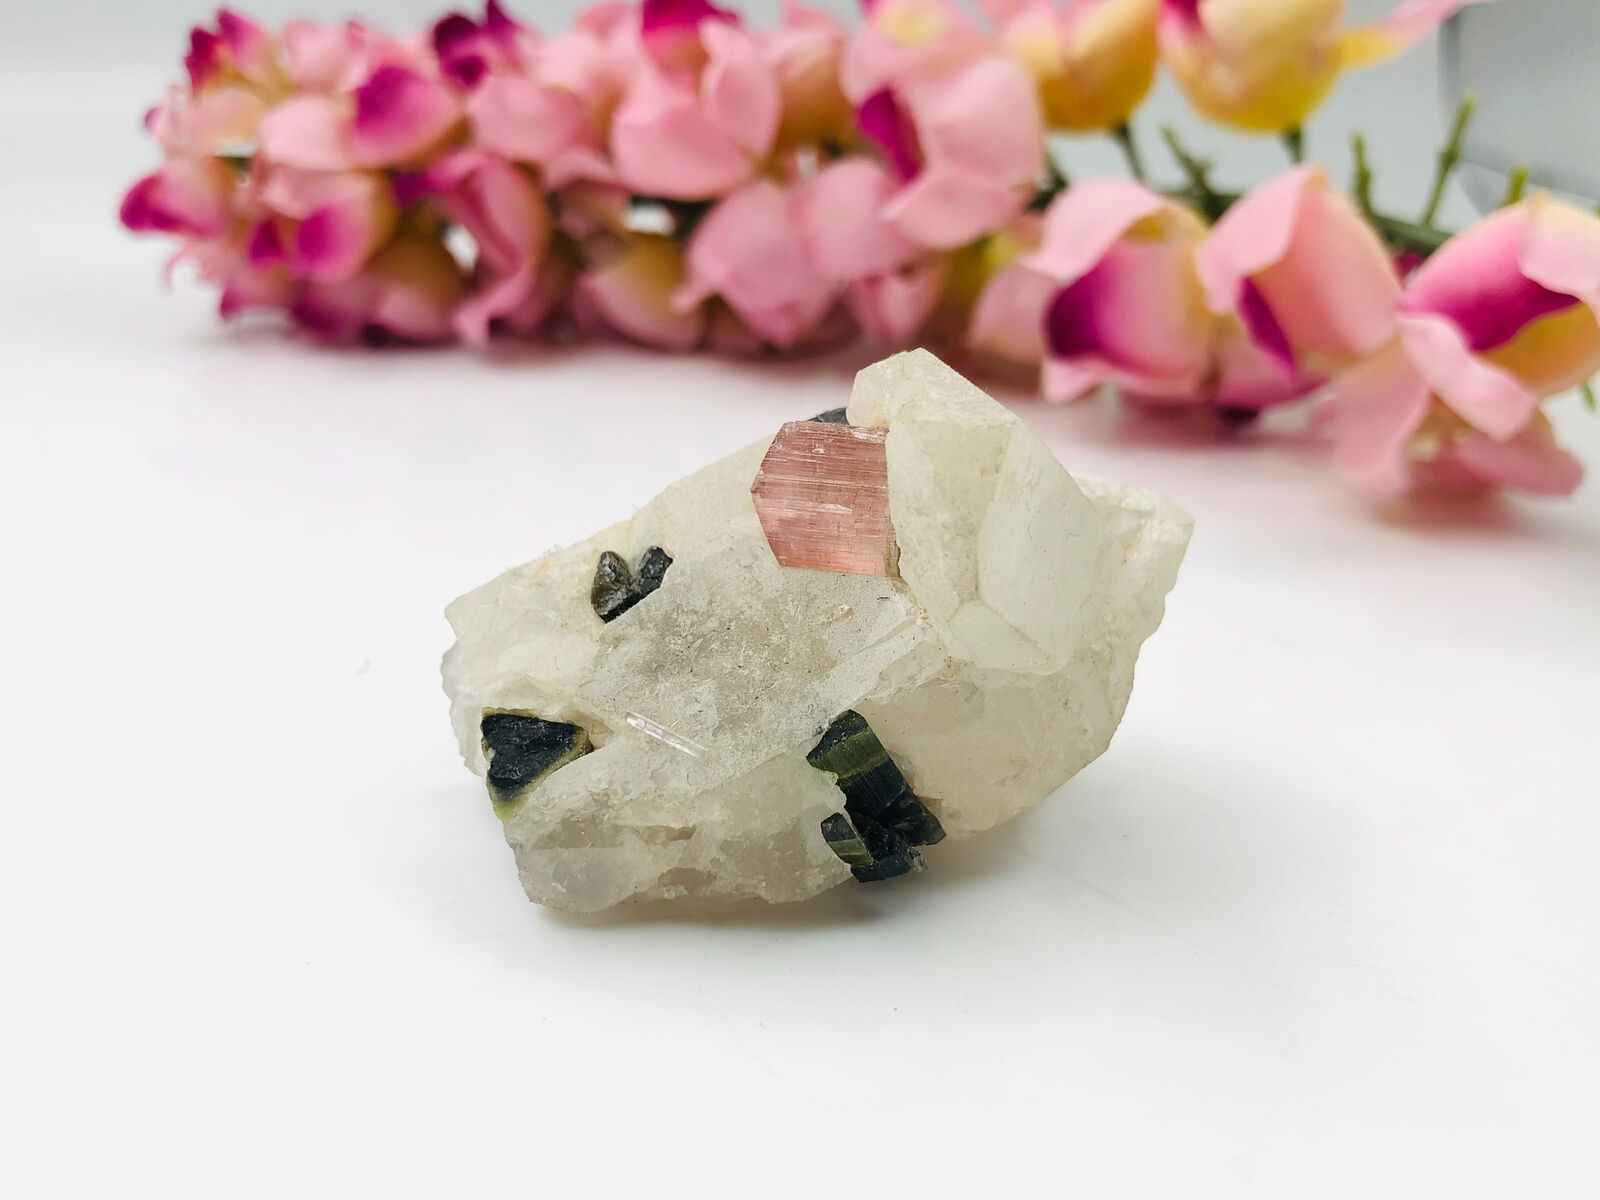 Natural Pink Tourmaline From Afghanistan Specimen Minerals Collection